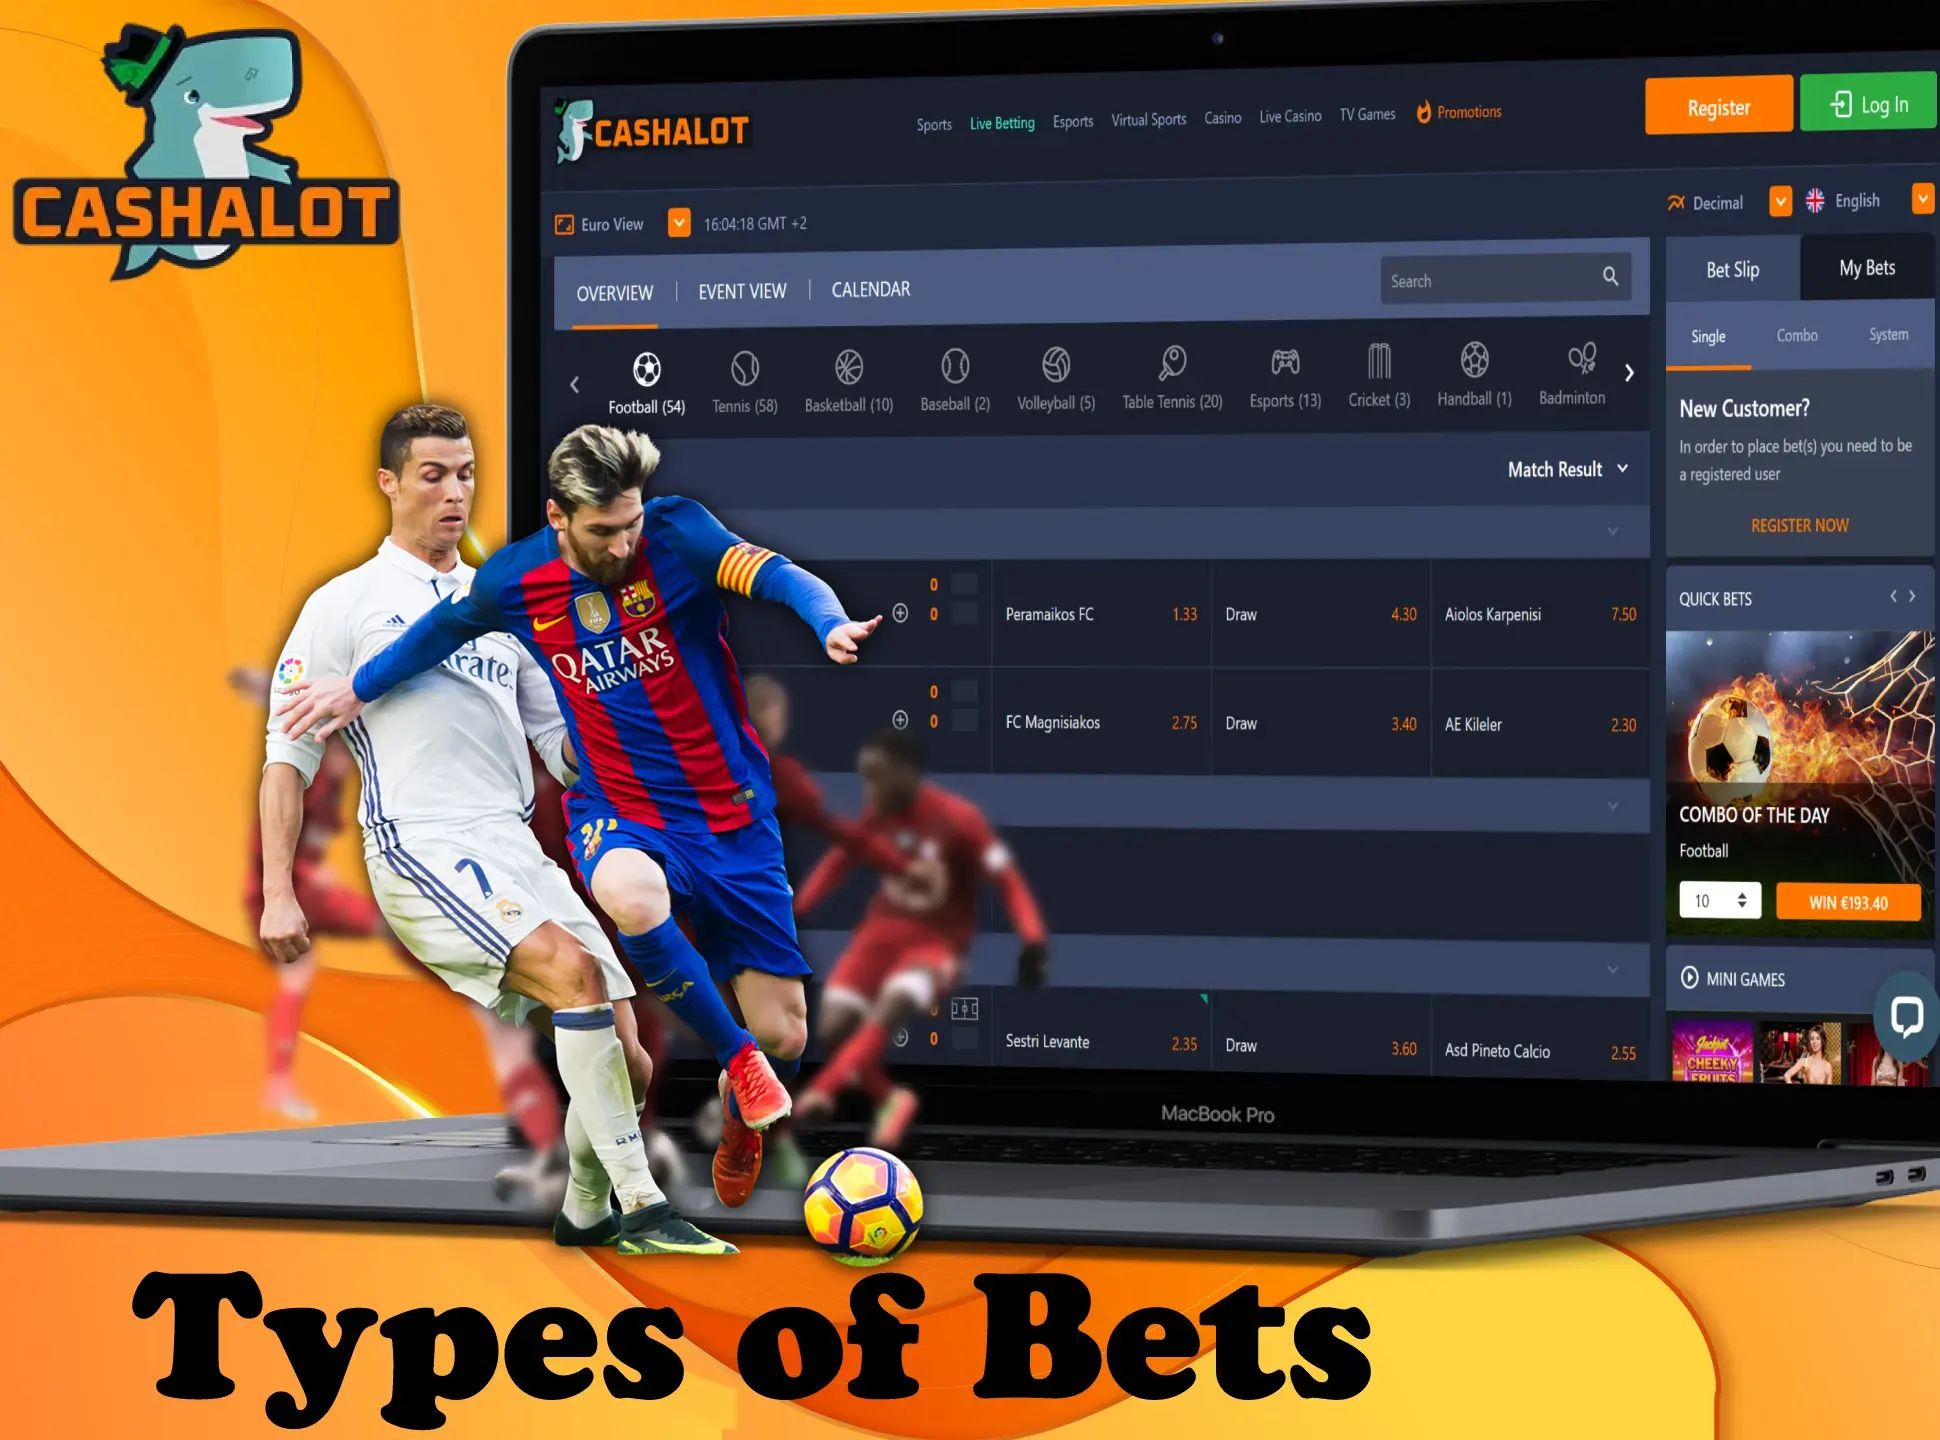 Use different types of bets when you make a new bet at Cashalot.